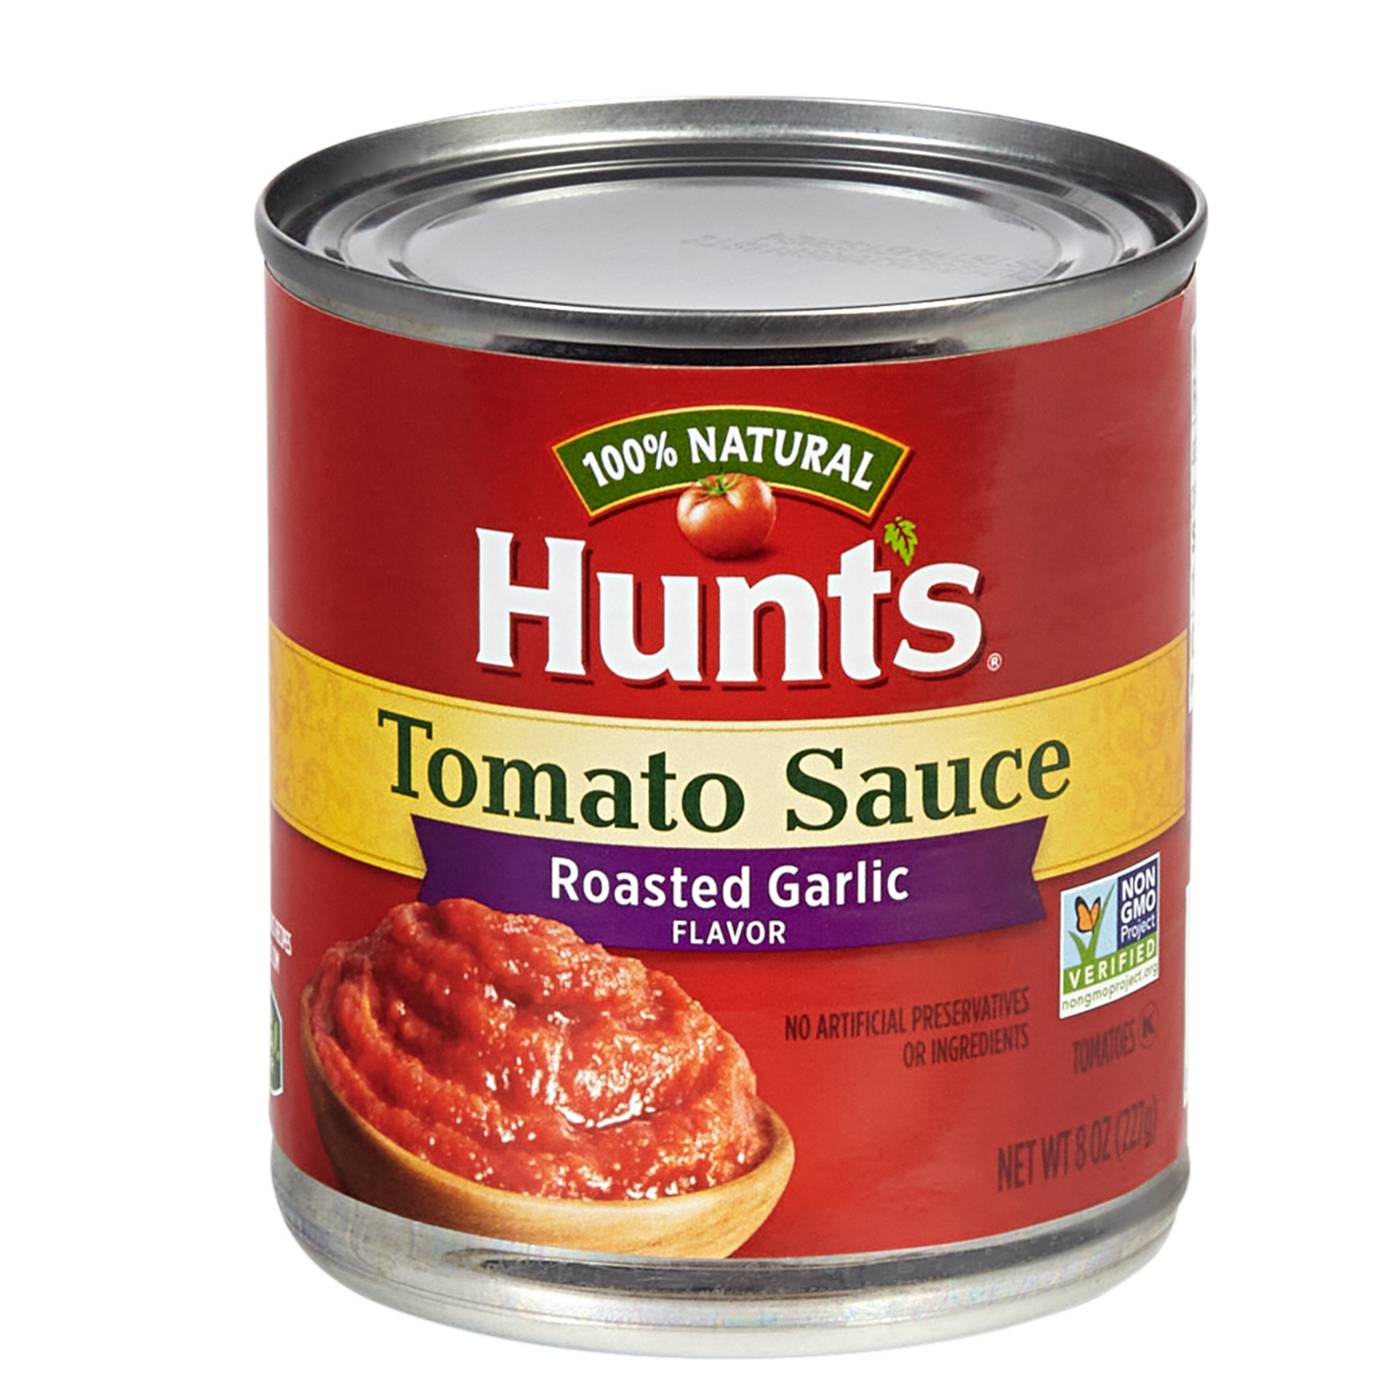 Hunt's Tomato Sauce with Roasted Garlic; image 1 of 7